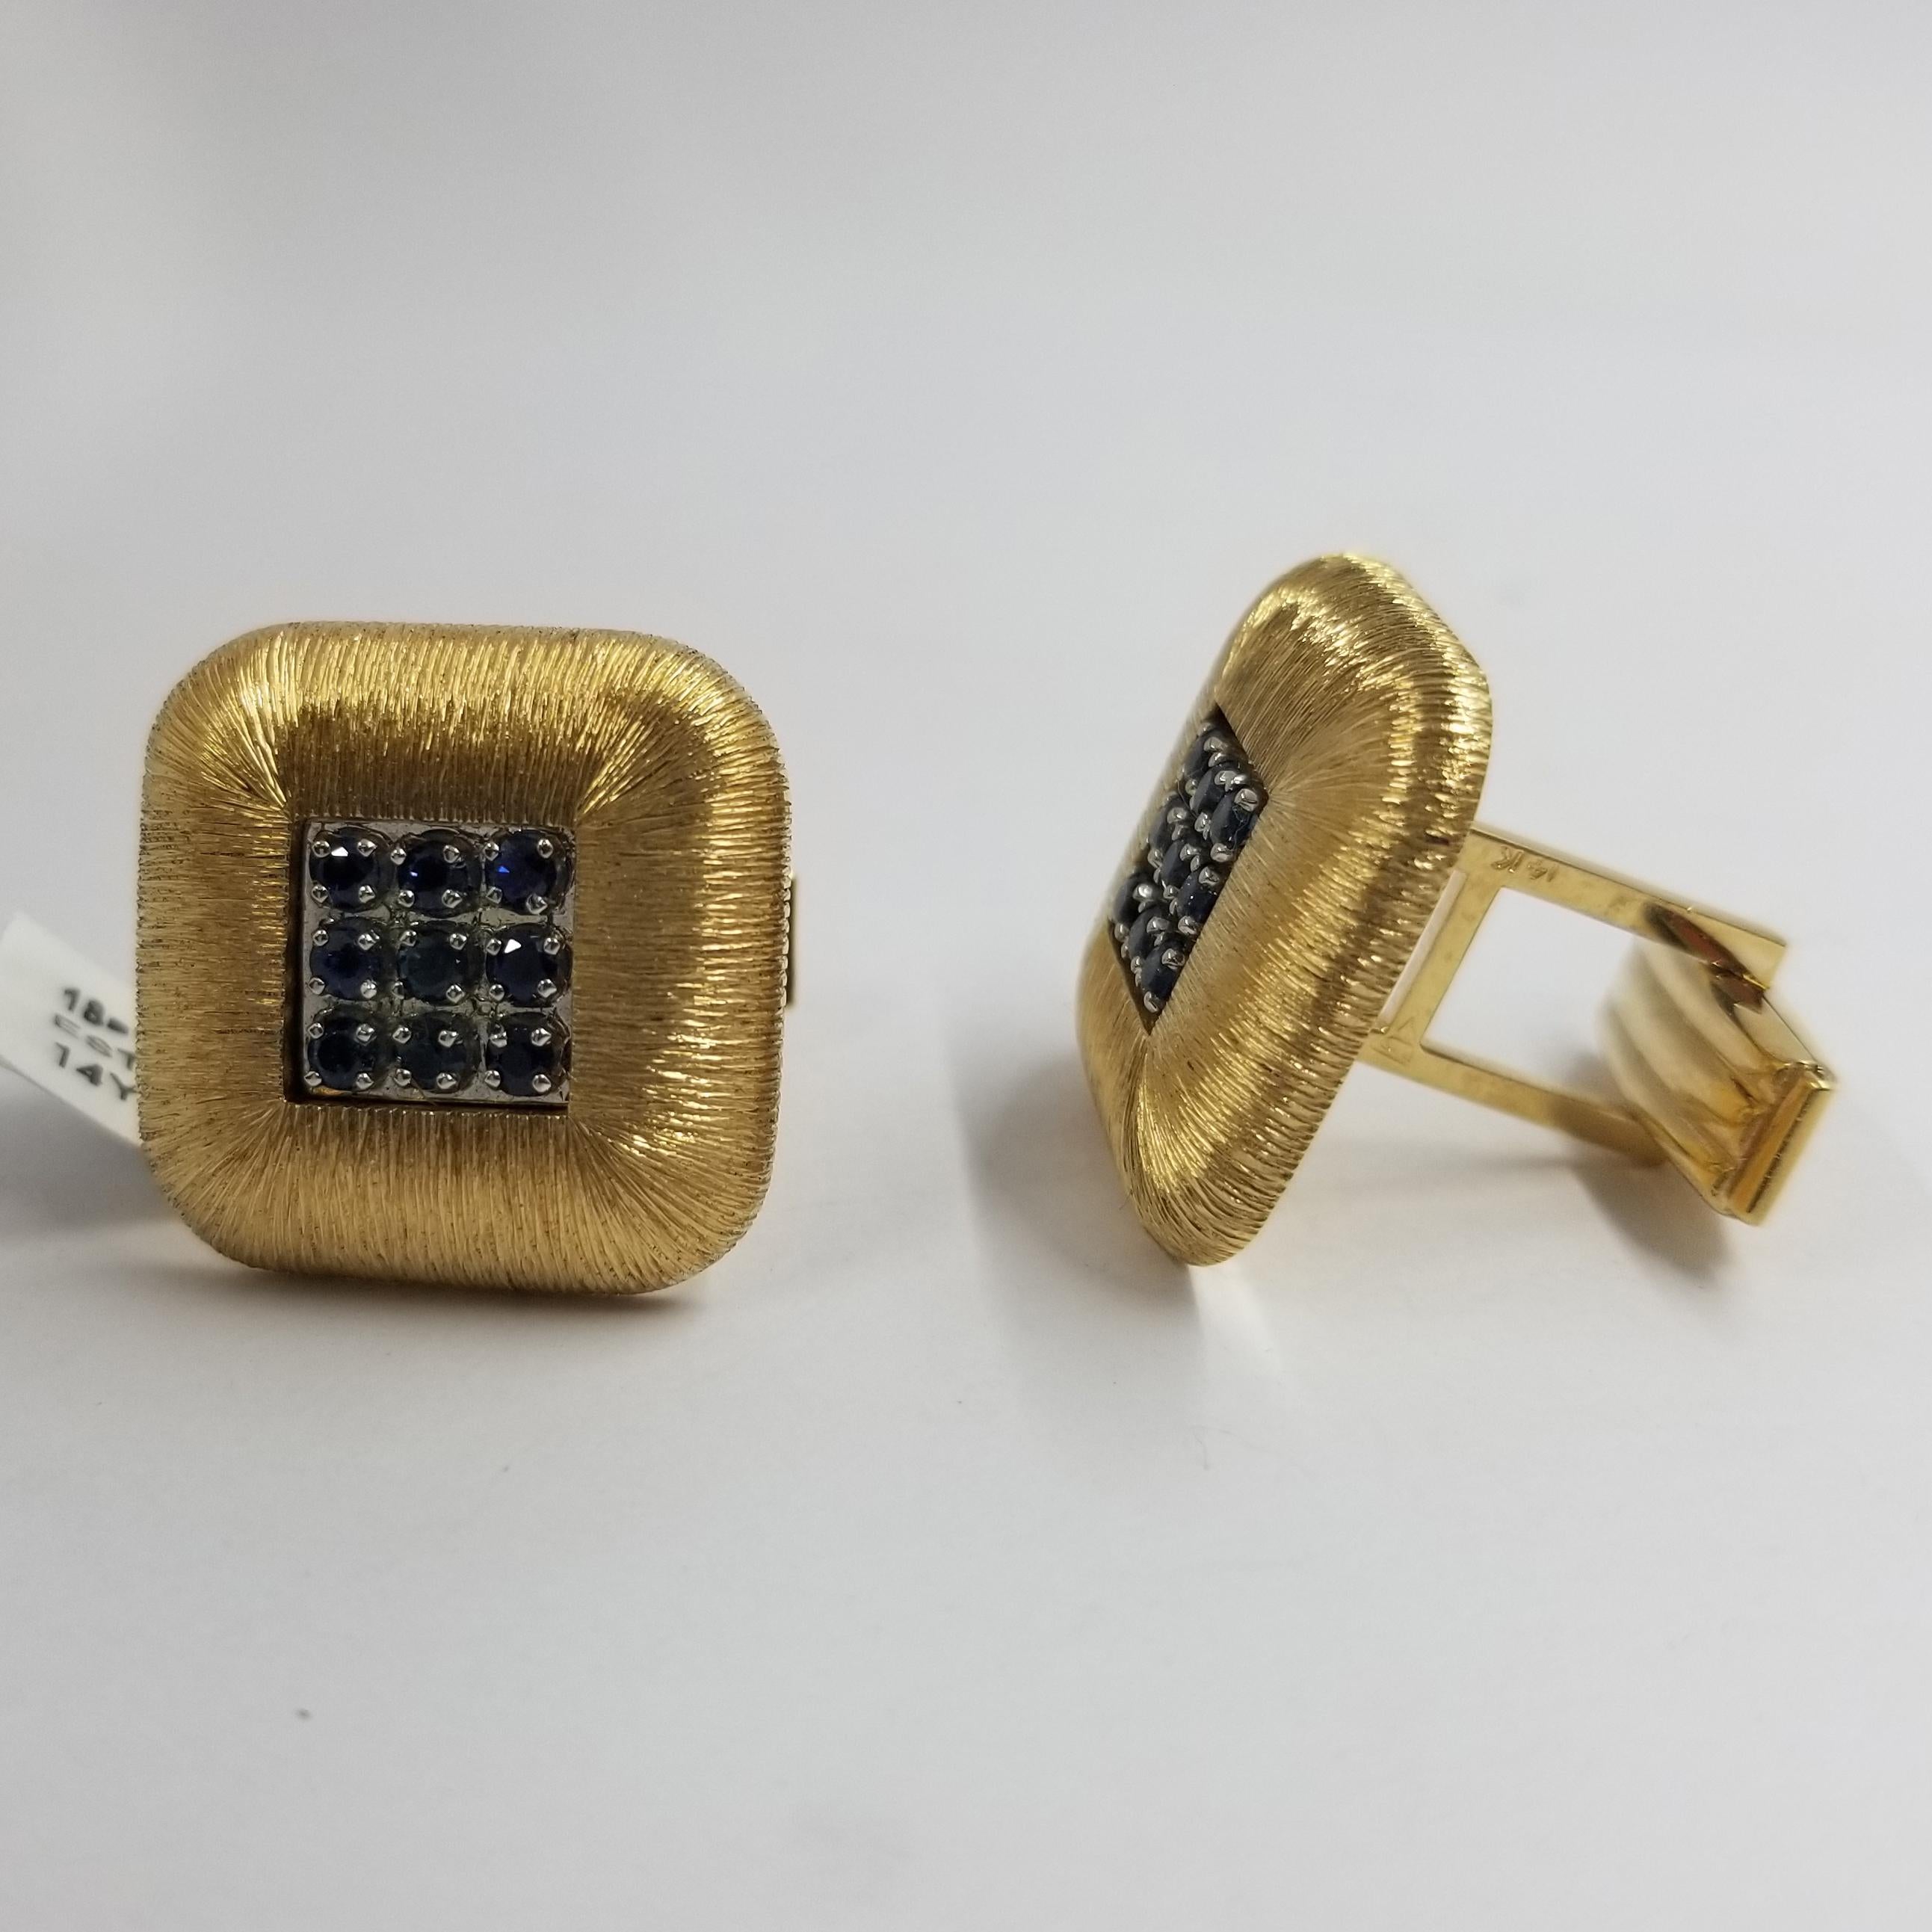 Set of 2 cufflinks crafted in 14 karat yellow gold (stamped). The front is textured in a radiating pattern around prong-set blue sapphires. 18 round sapphires total approximately 1.00 carat. The backs are a hinged torpedo style for easy dressing.